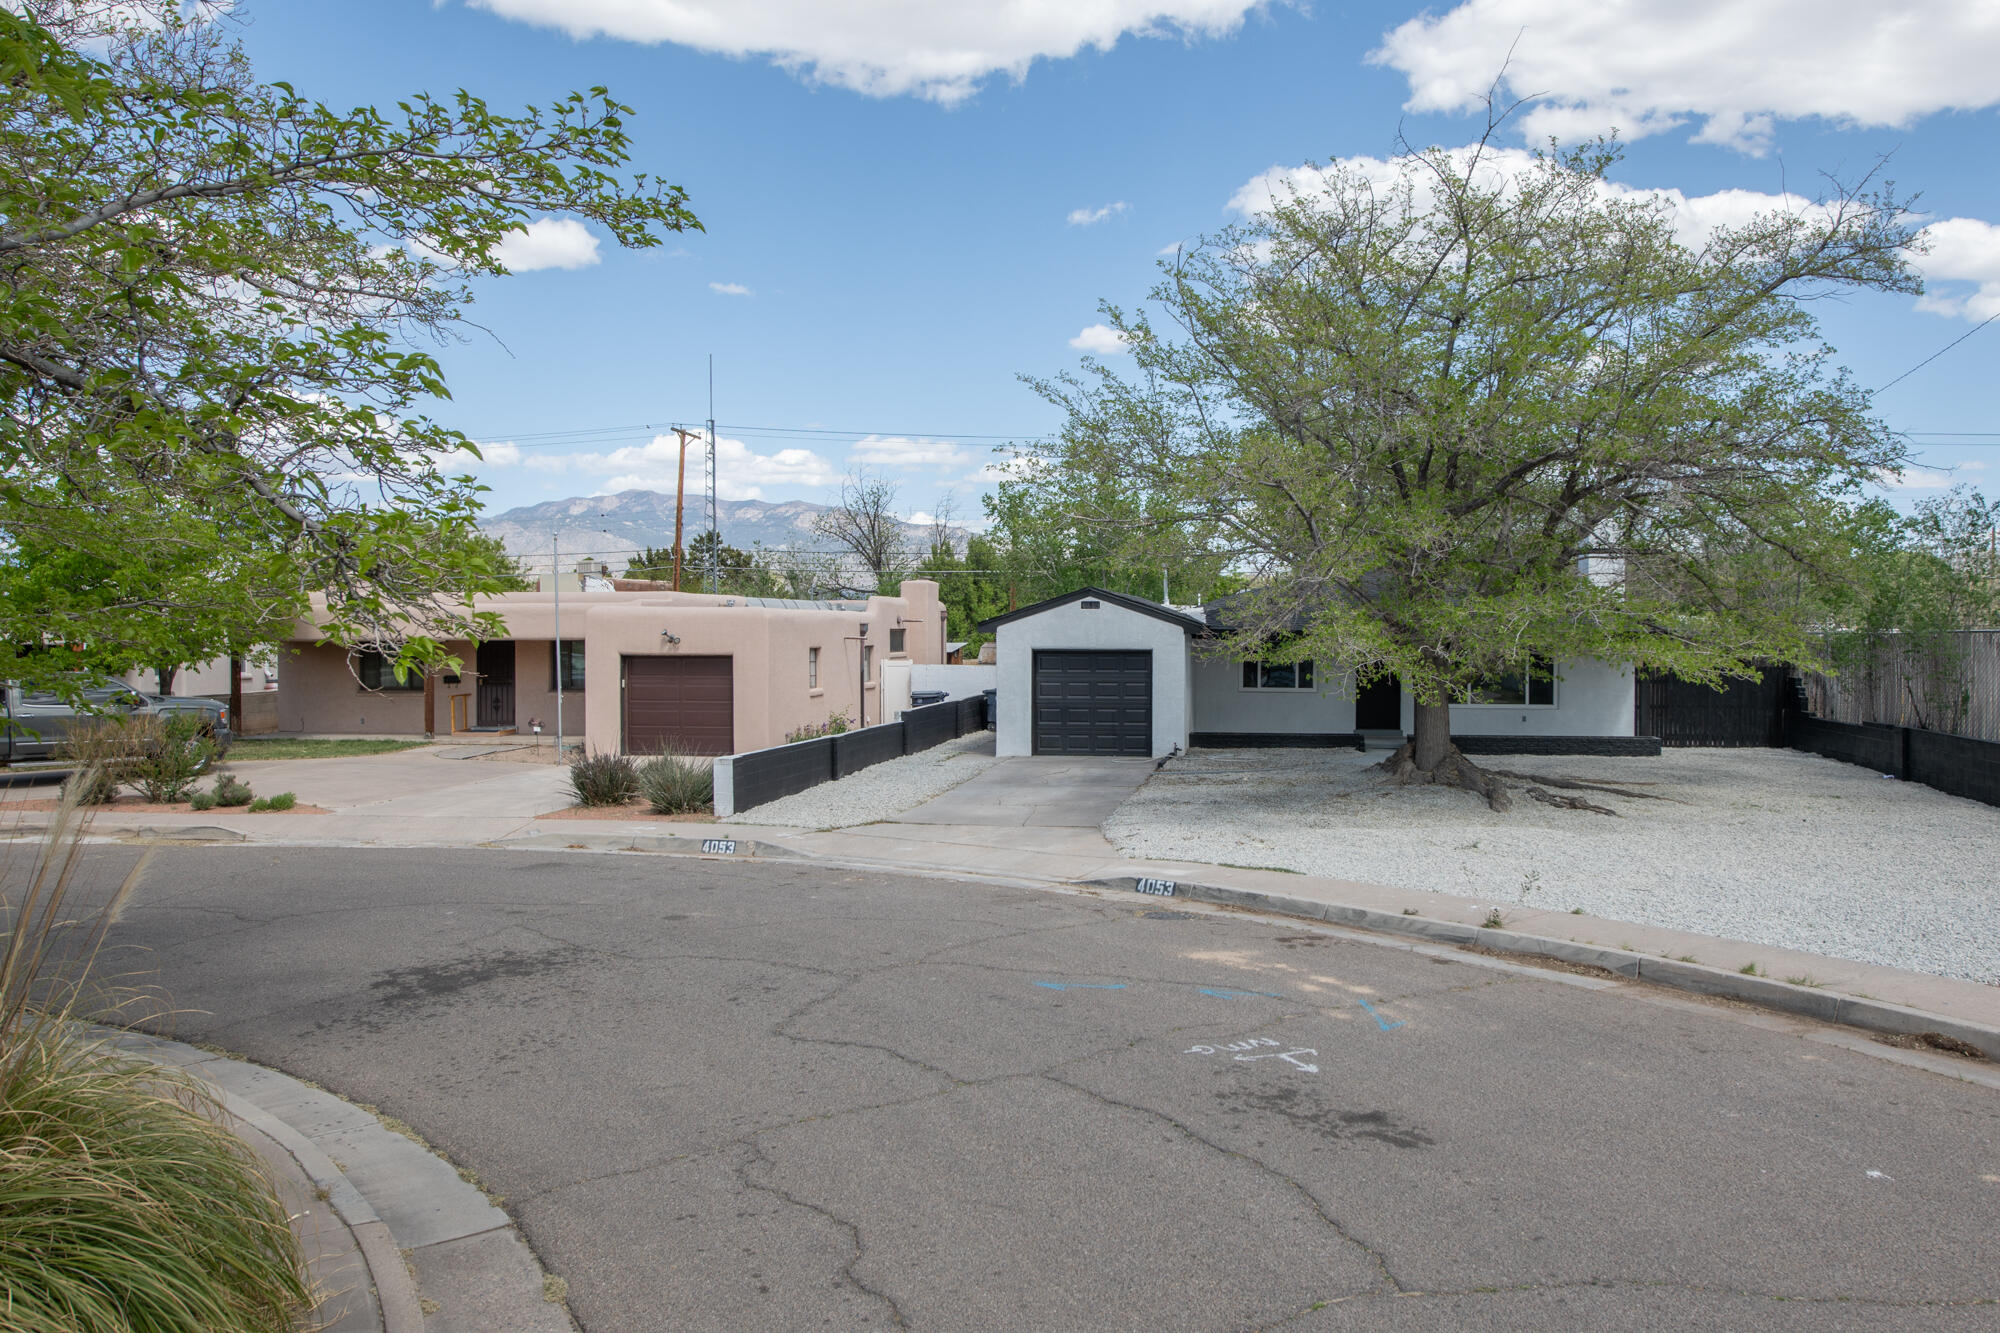 4053 Simms Court SE, Albuquerque, New Mexico 87108, 3 Bedrooms Bedrooms, ,2 BathroomsBathrooms,Residential,For Sale,4053 Simms Court SE,1061547